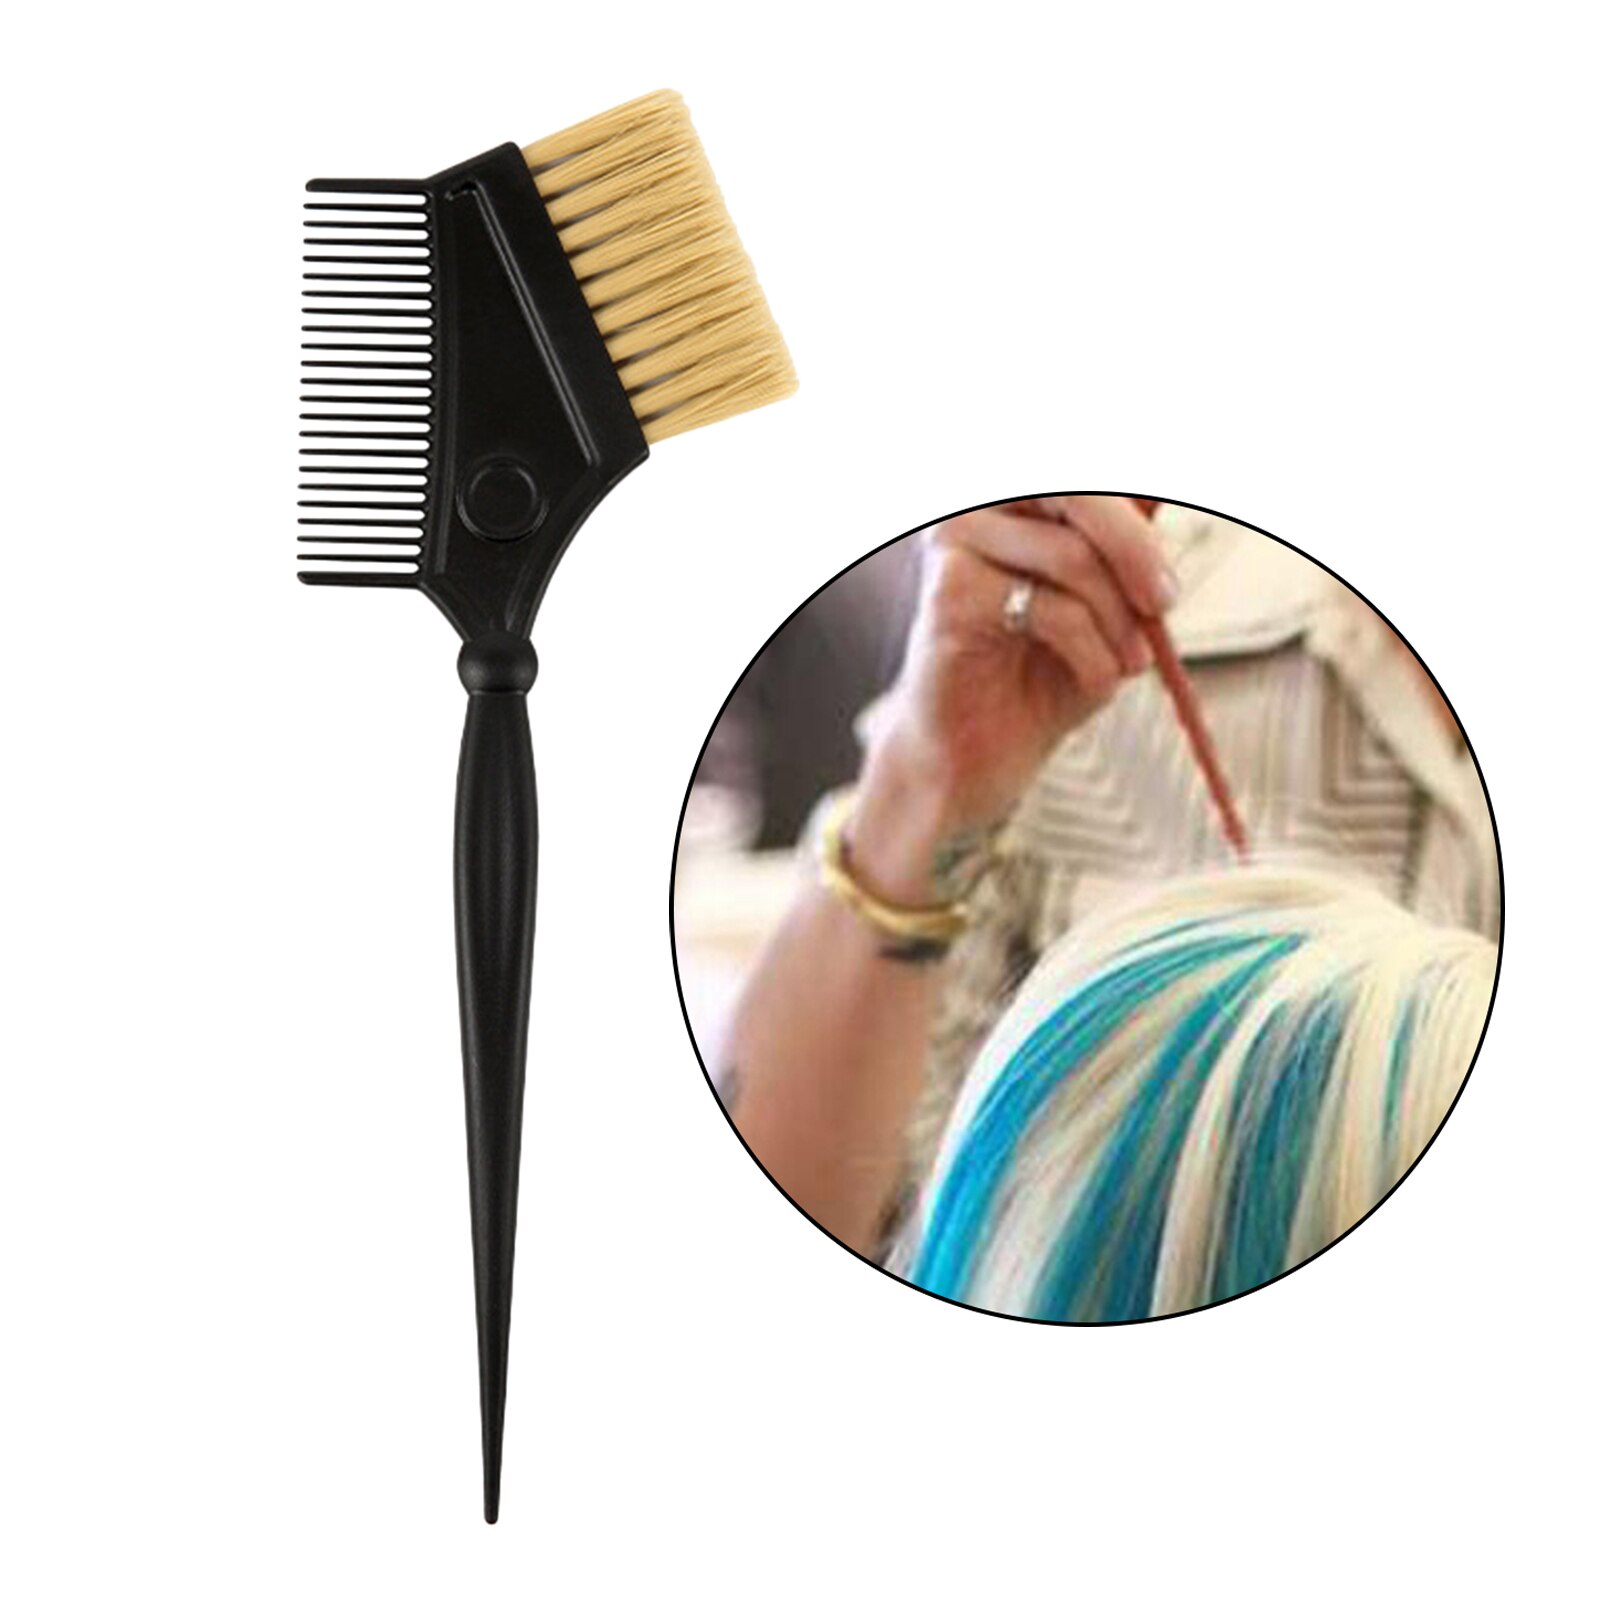 Hair Dye Brushes with Integrated Combs Hair Dye Brush Applicator Hair Touch Up Brush Color Brushes for Hair Salon Dying